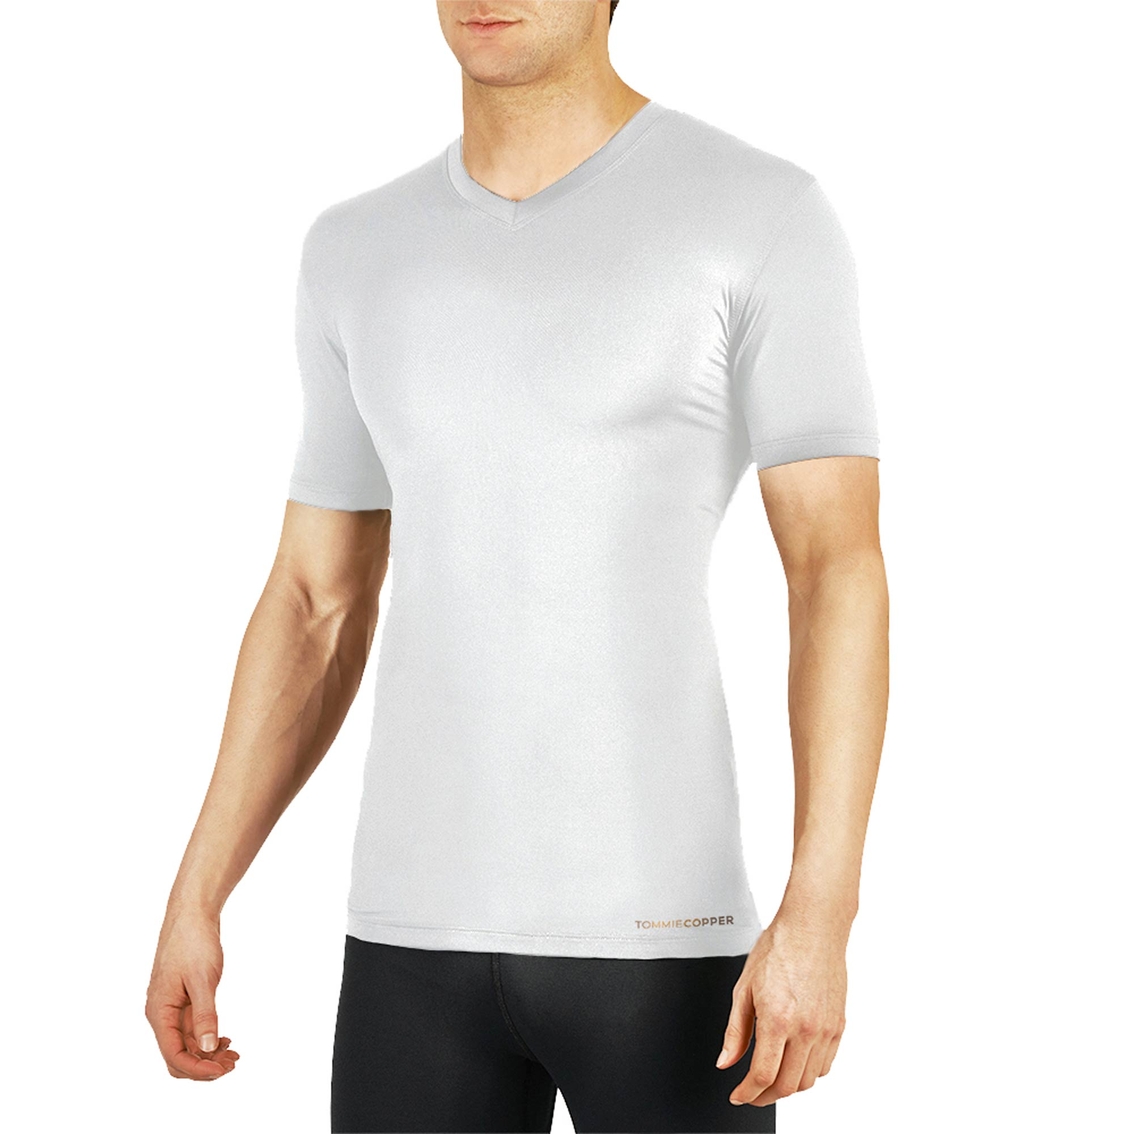 Tommie Copper V Neck Compression Shirt | Shirts | Clothing ...